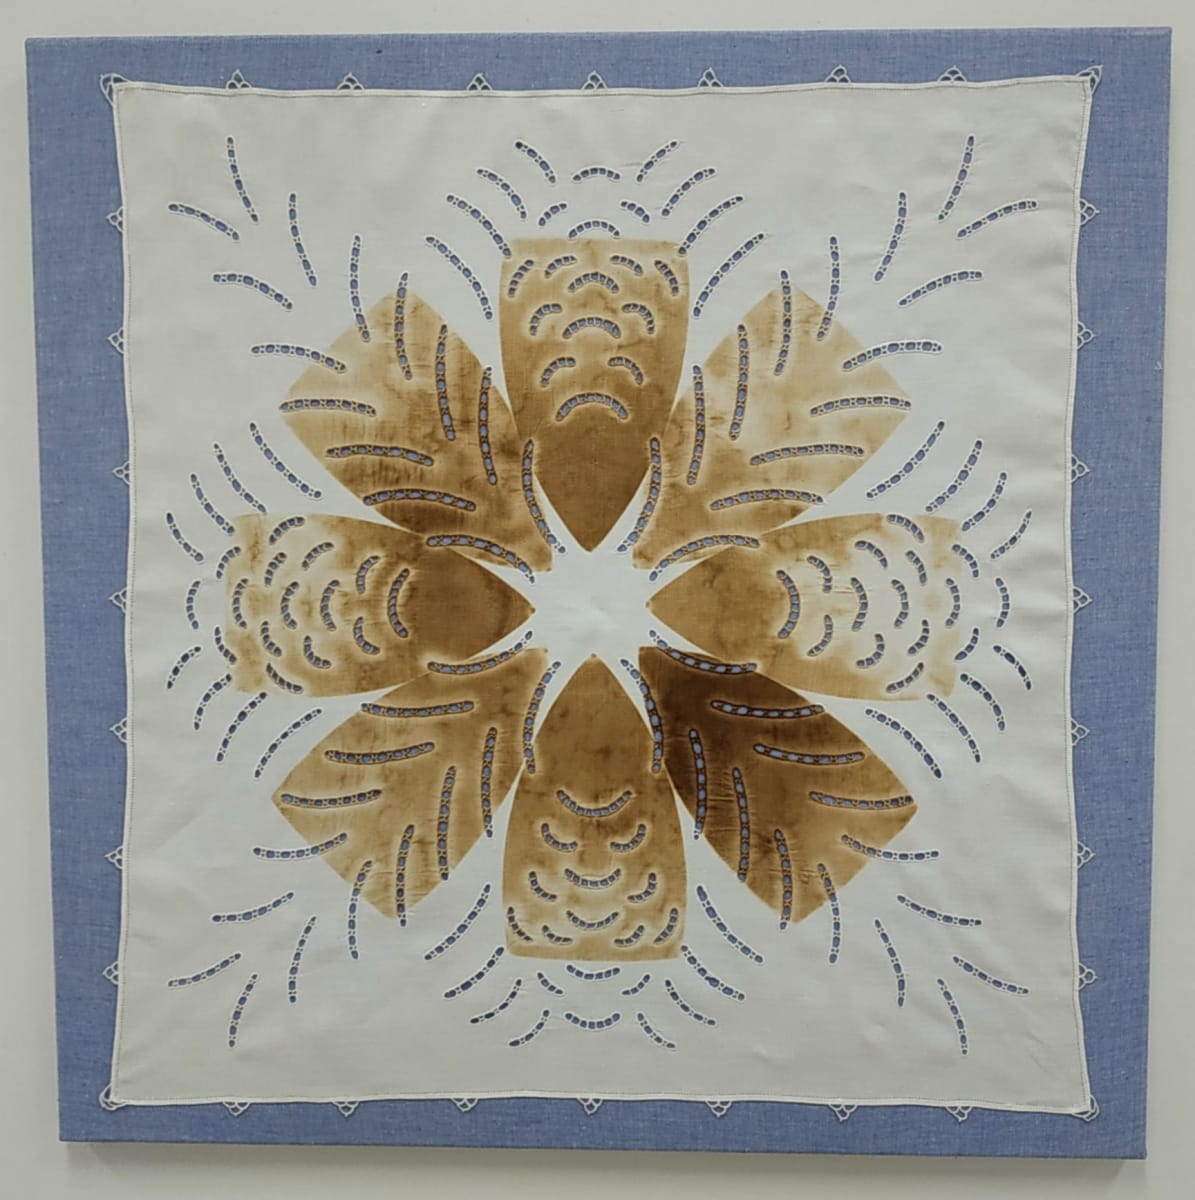 Scorch: Mandala by Lesley Turner  Image: Lesley Turner, 'Scorch: Mandala', 2020, 28"x28". Vintage tea cloth, cotton fabric, polyester thread. A circular arrangement of elements helps focus attention on the task and provides a creative distraction.